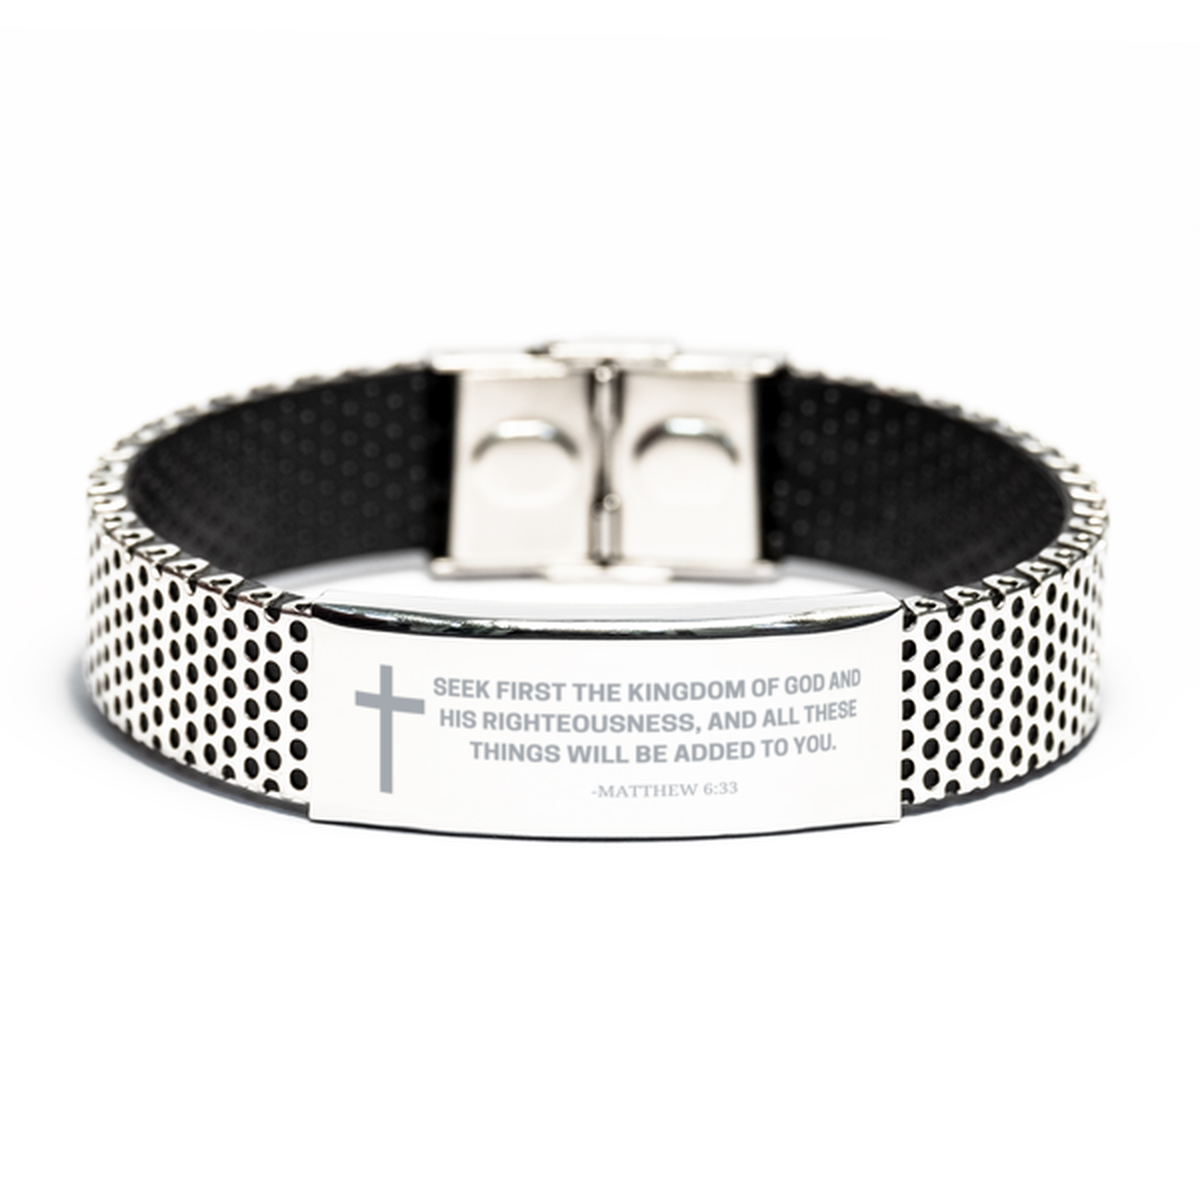 Baptism Gifts For Teenage Boys Girls, Christian Bible Verse Stainless Steel Bracelet, Seek first the kingdom of God, Catholic Confirmation Gifts for Son, Godson, Grandson, Nephew